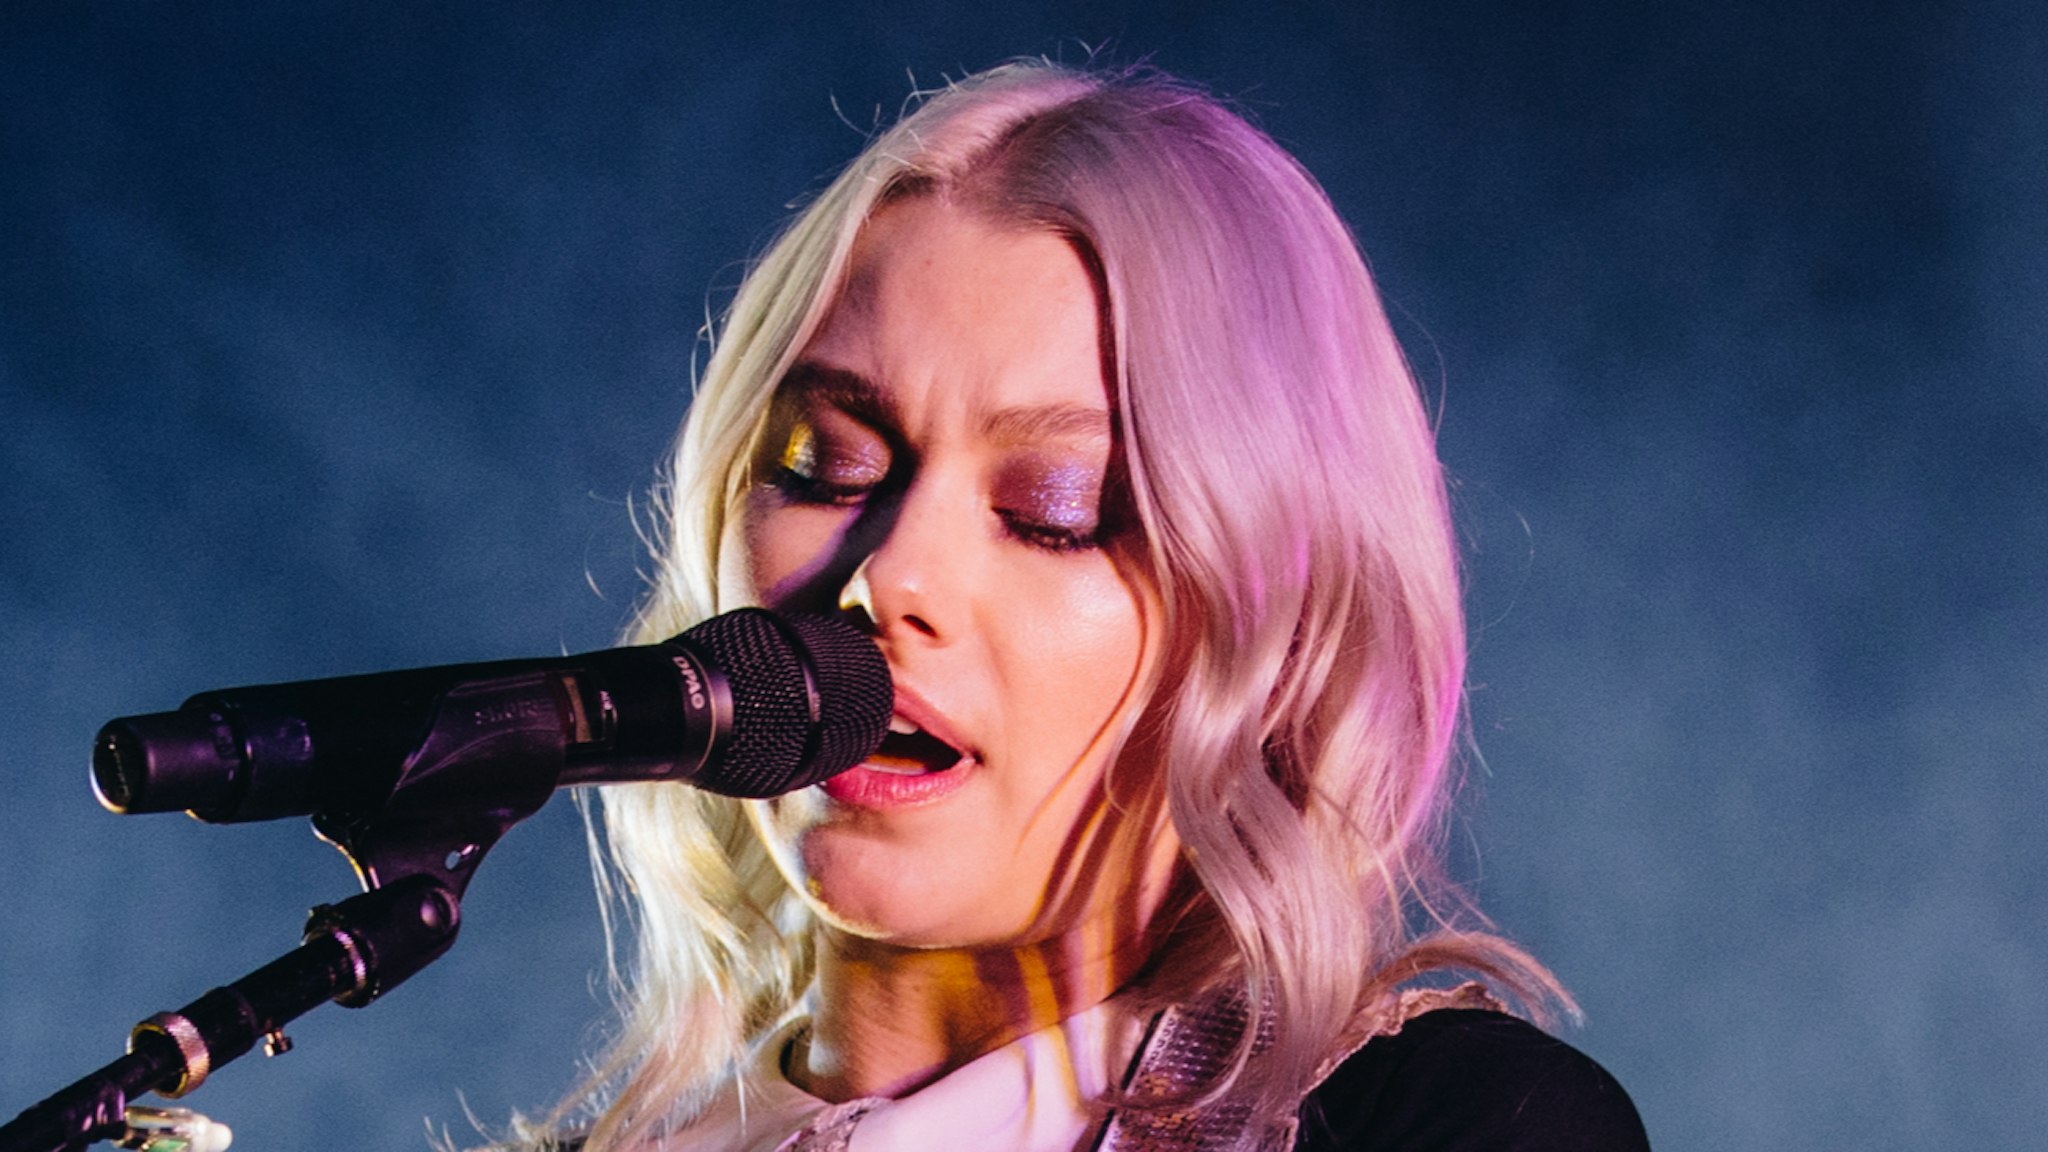 Phoebe Bridgers performs onstage at the Greek Theatre on October 21, 2021 in Los Angeles, California.